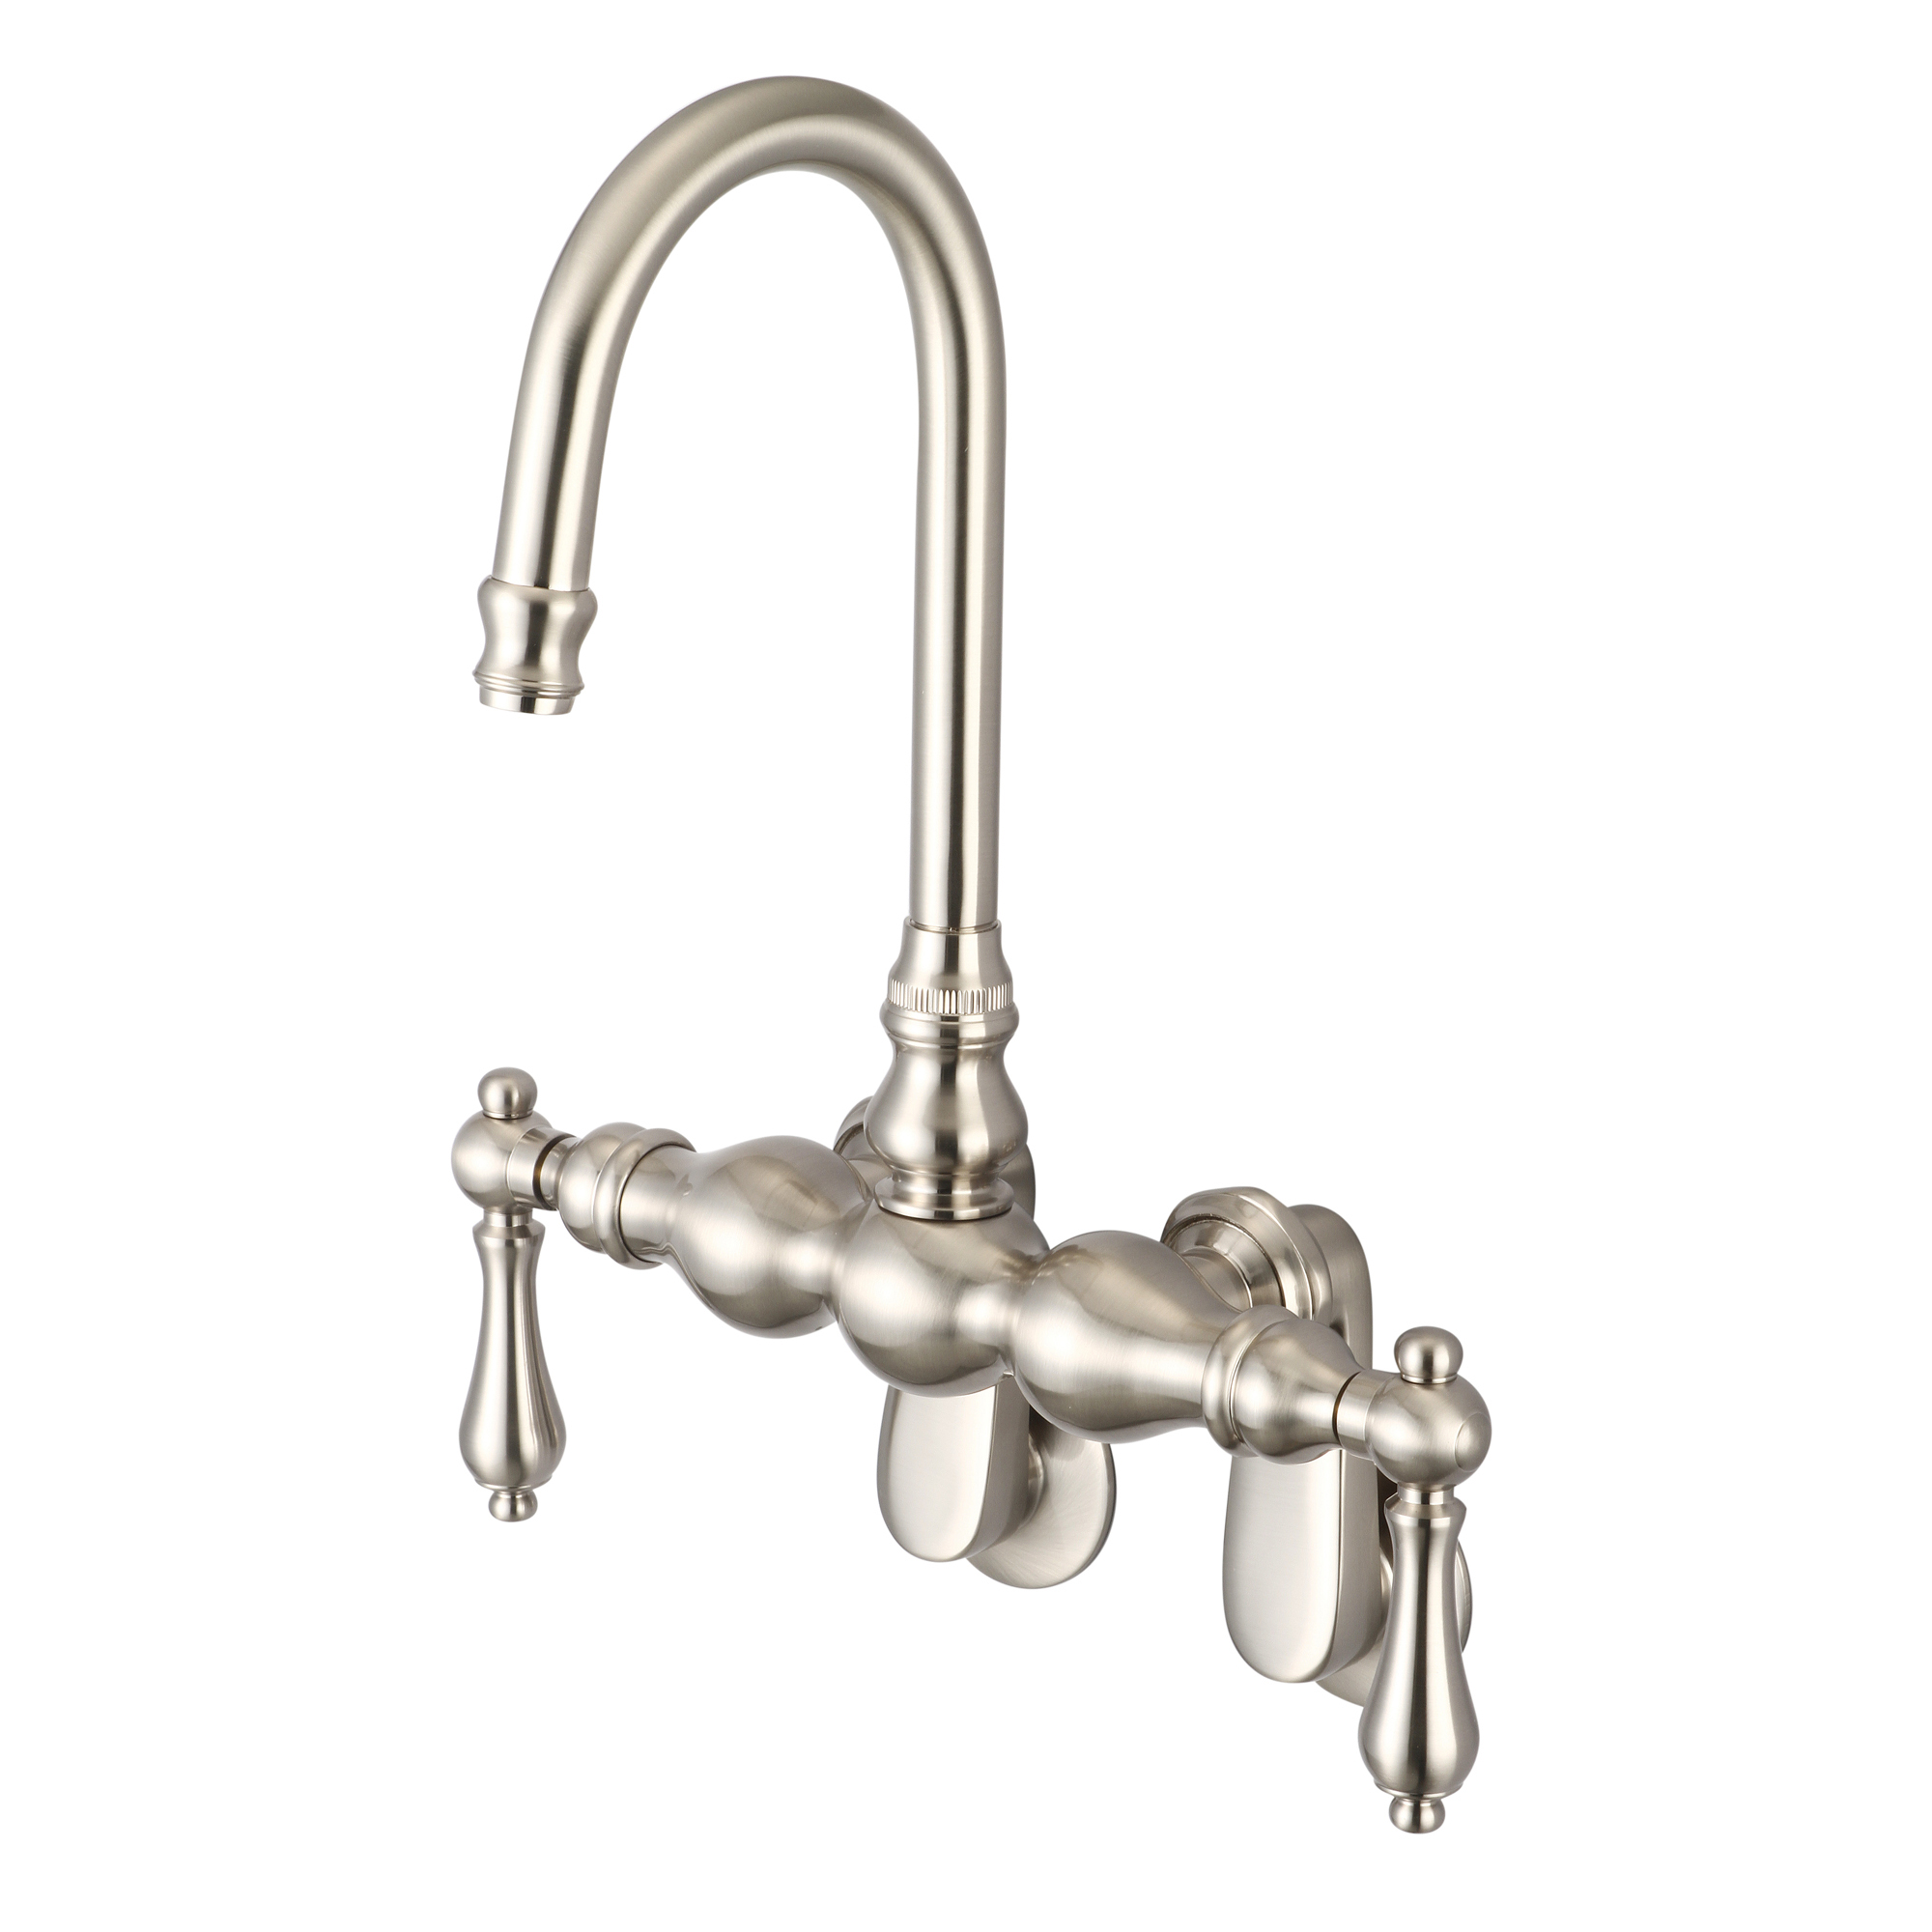 Vintage Classic Adjustable Spread Wall Mount Tub Faucet With Gooseneck Spout & Swivel Wall Connector in Brushed Nickel Finish With Metal Lever Handles Without Labels